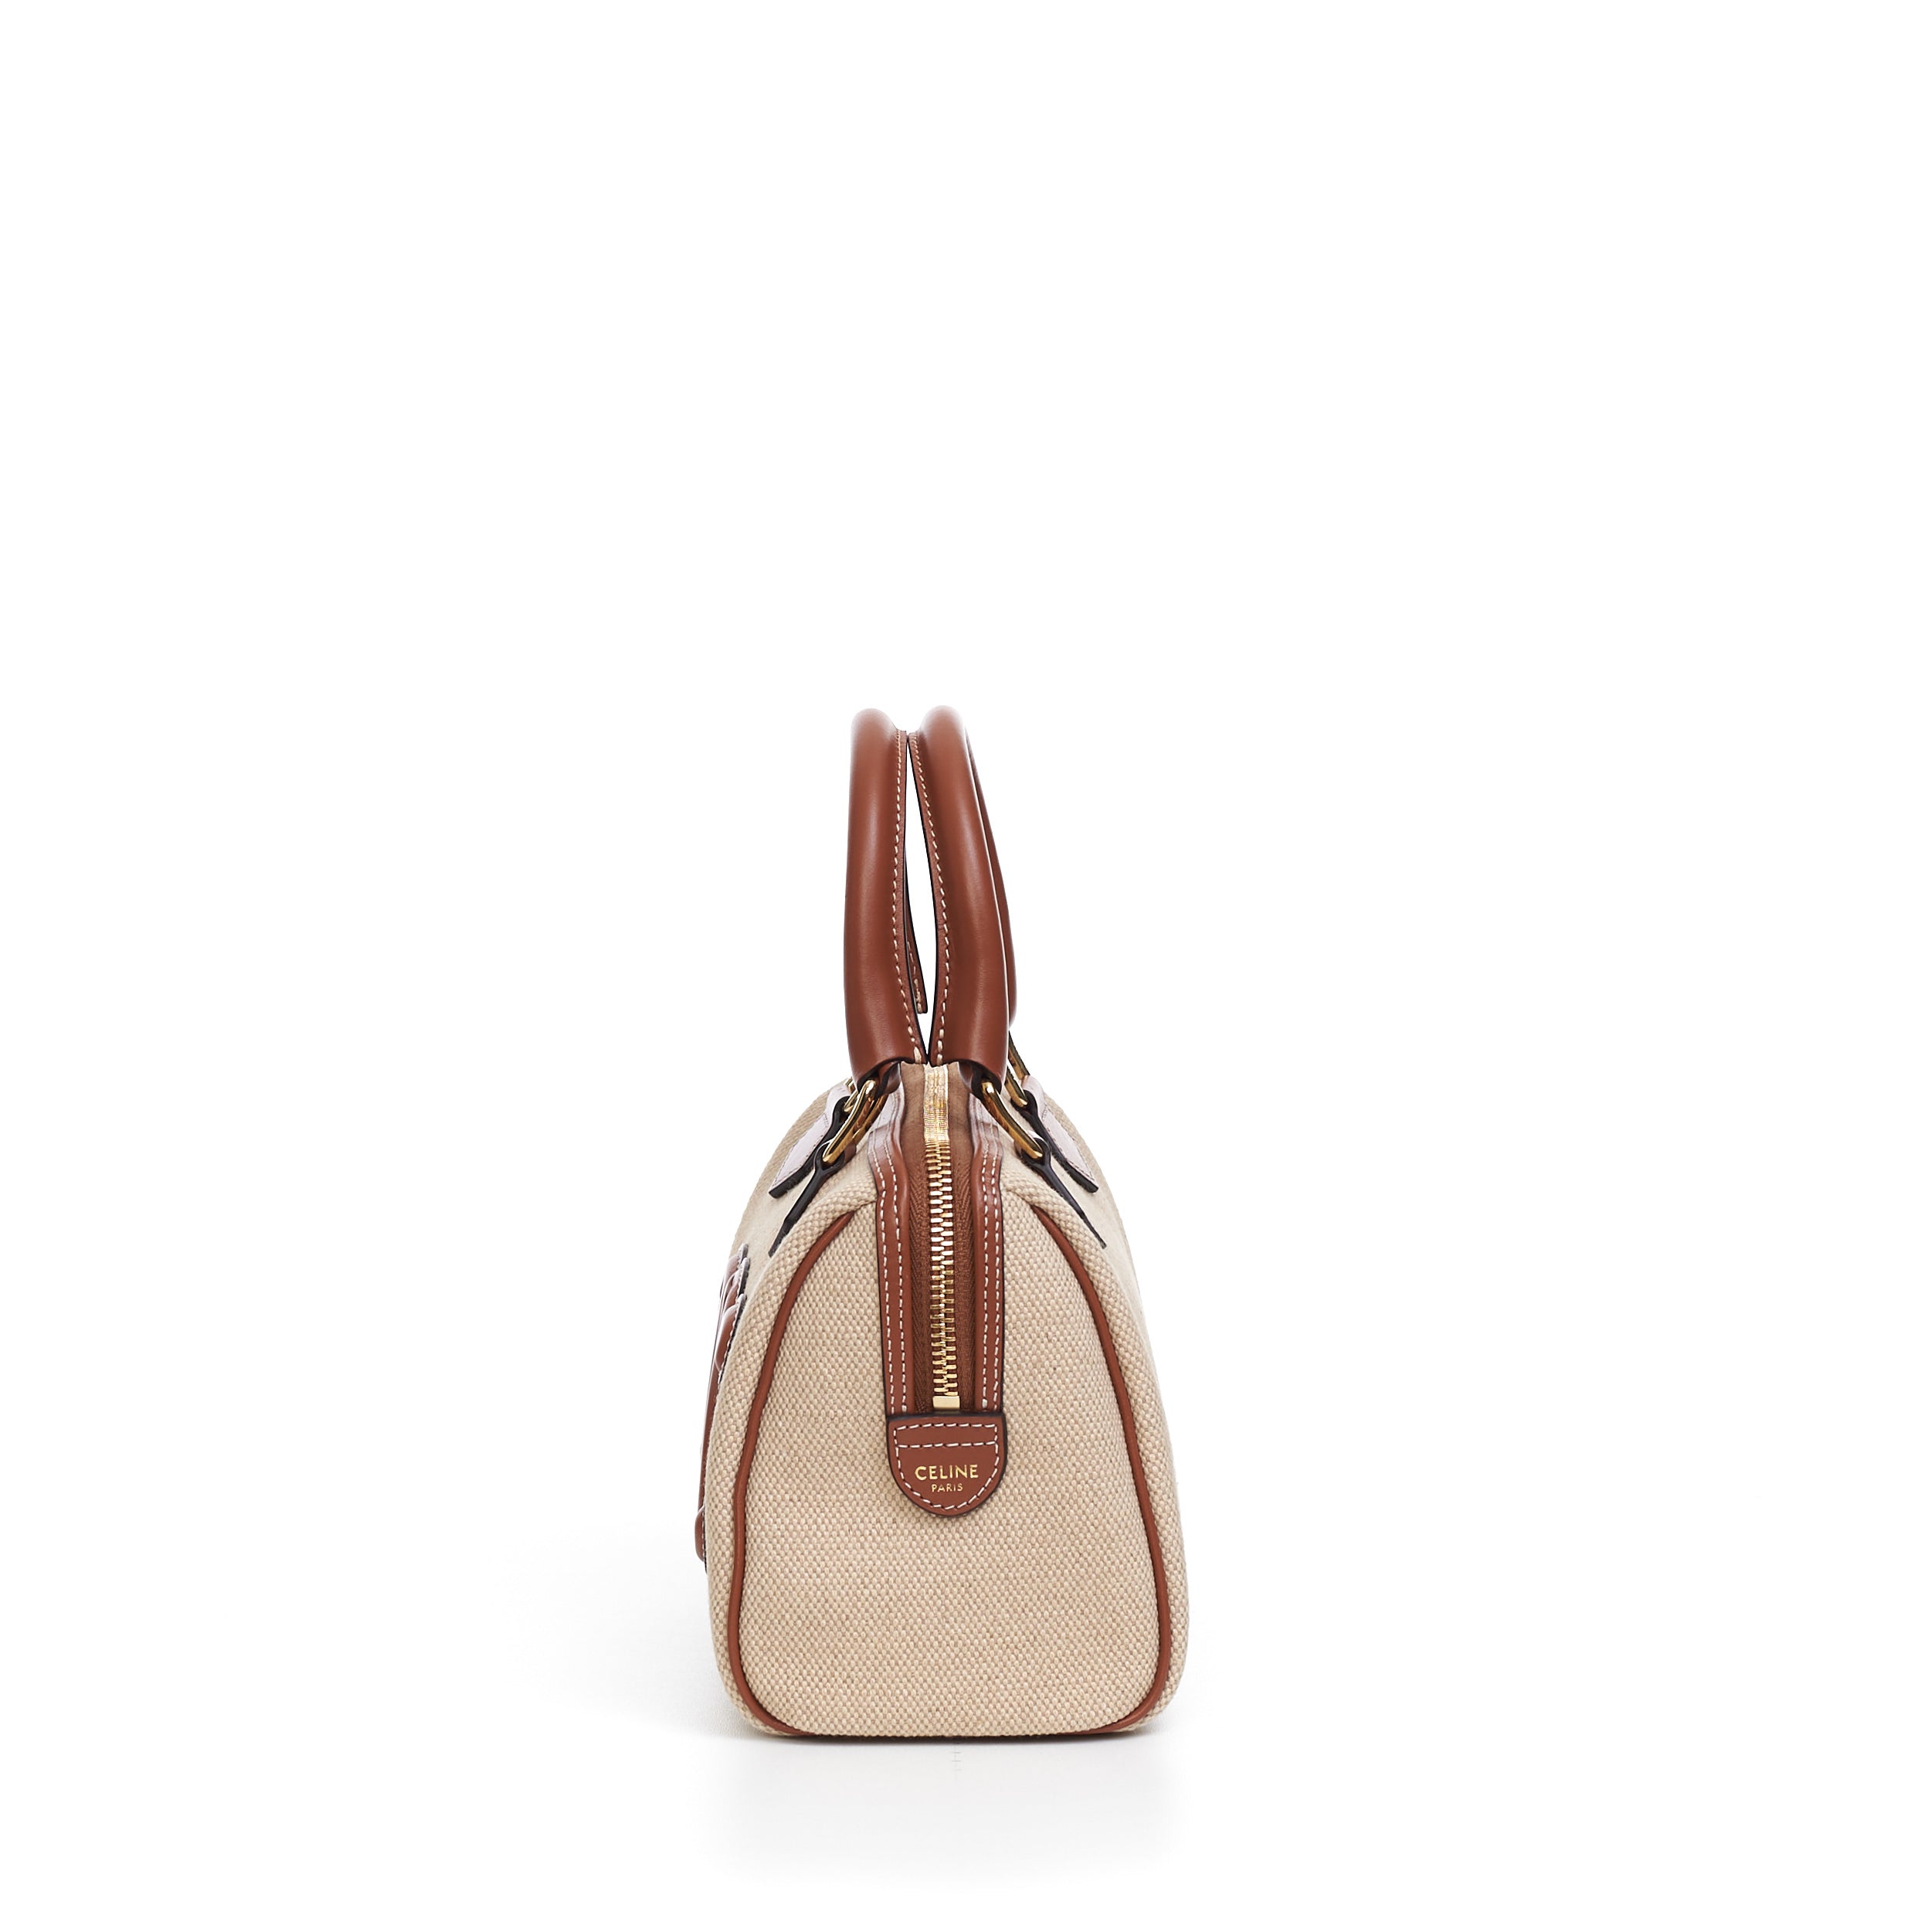 SMALL BUCKET CUIR TRIOMPHE IN TEXTILE AND CALFSKIN - NATURAL / TAN